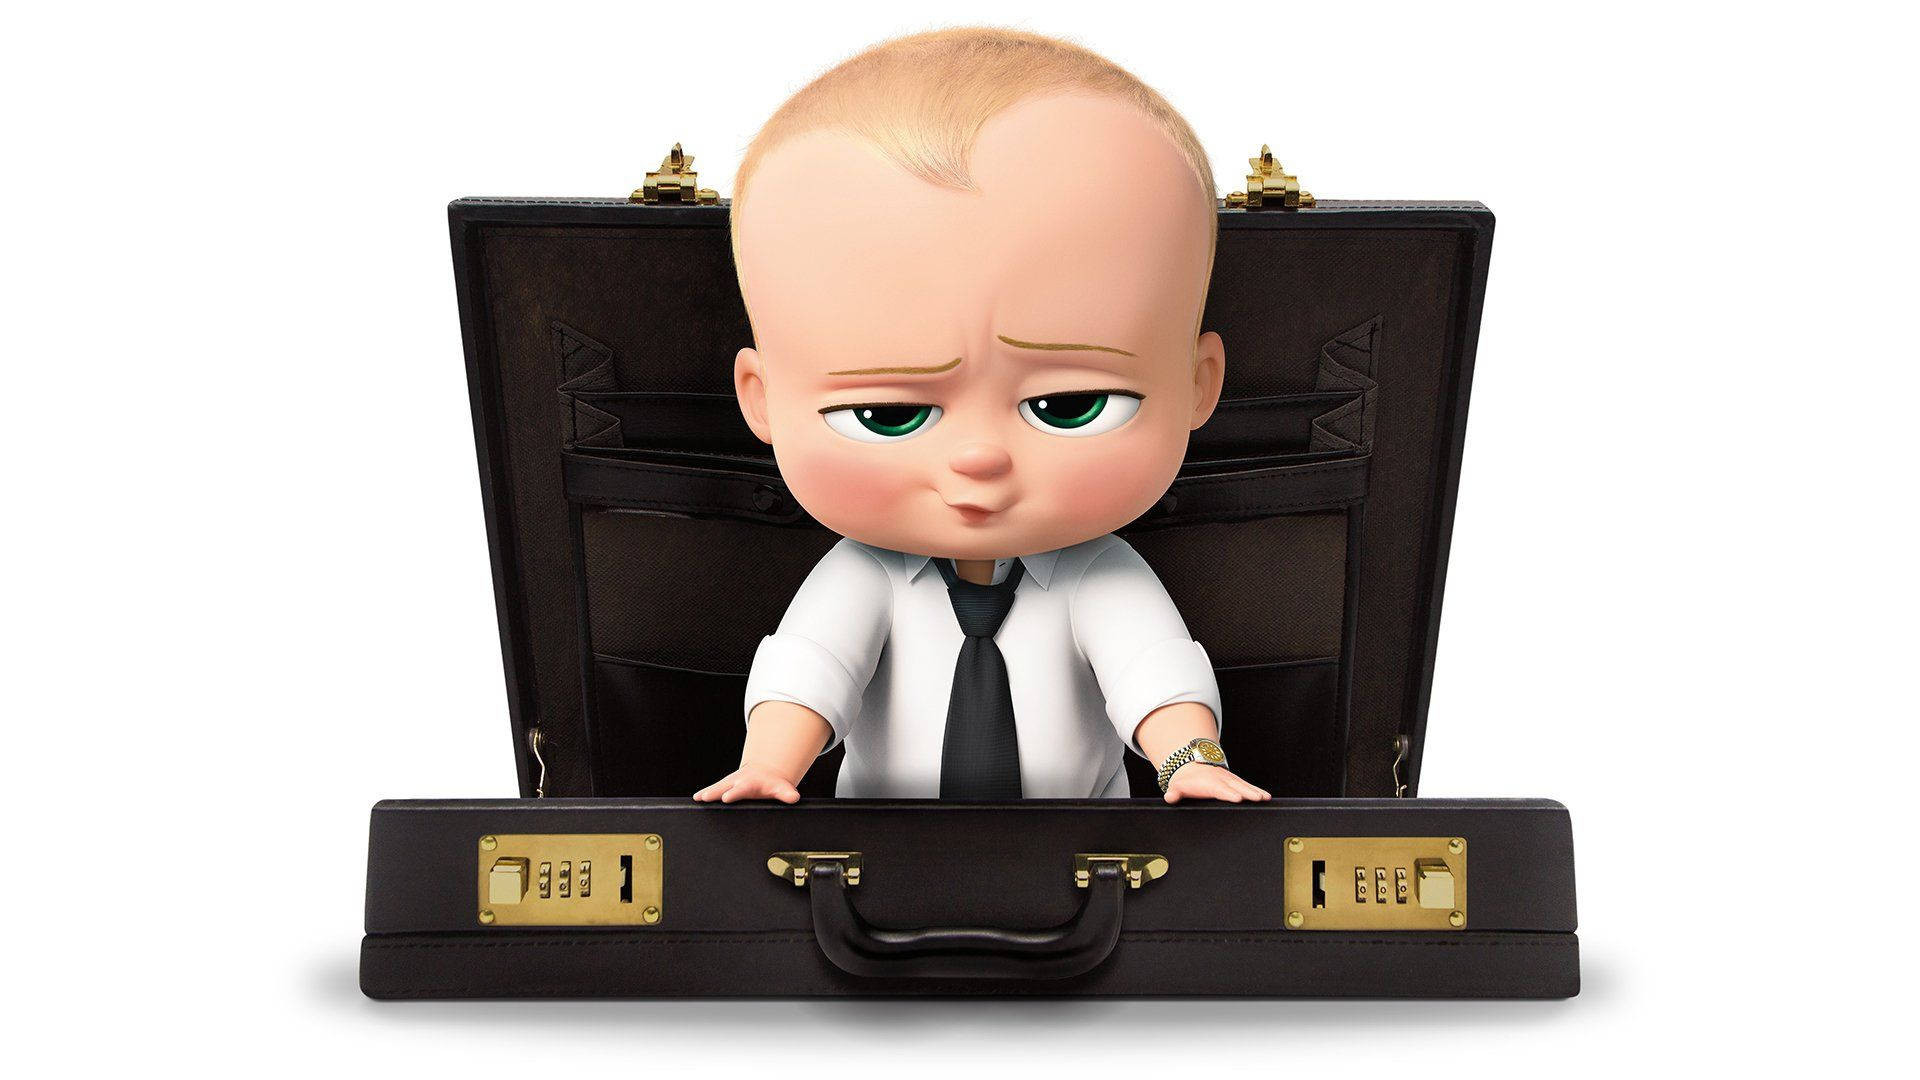 Download The Boss Baby In A Suitcase Wallpaper | Wallpapers.com